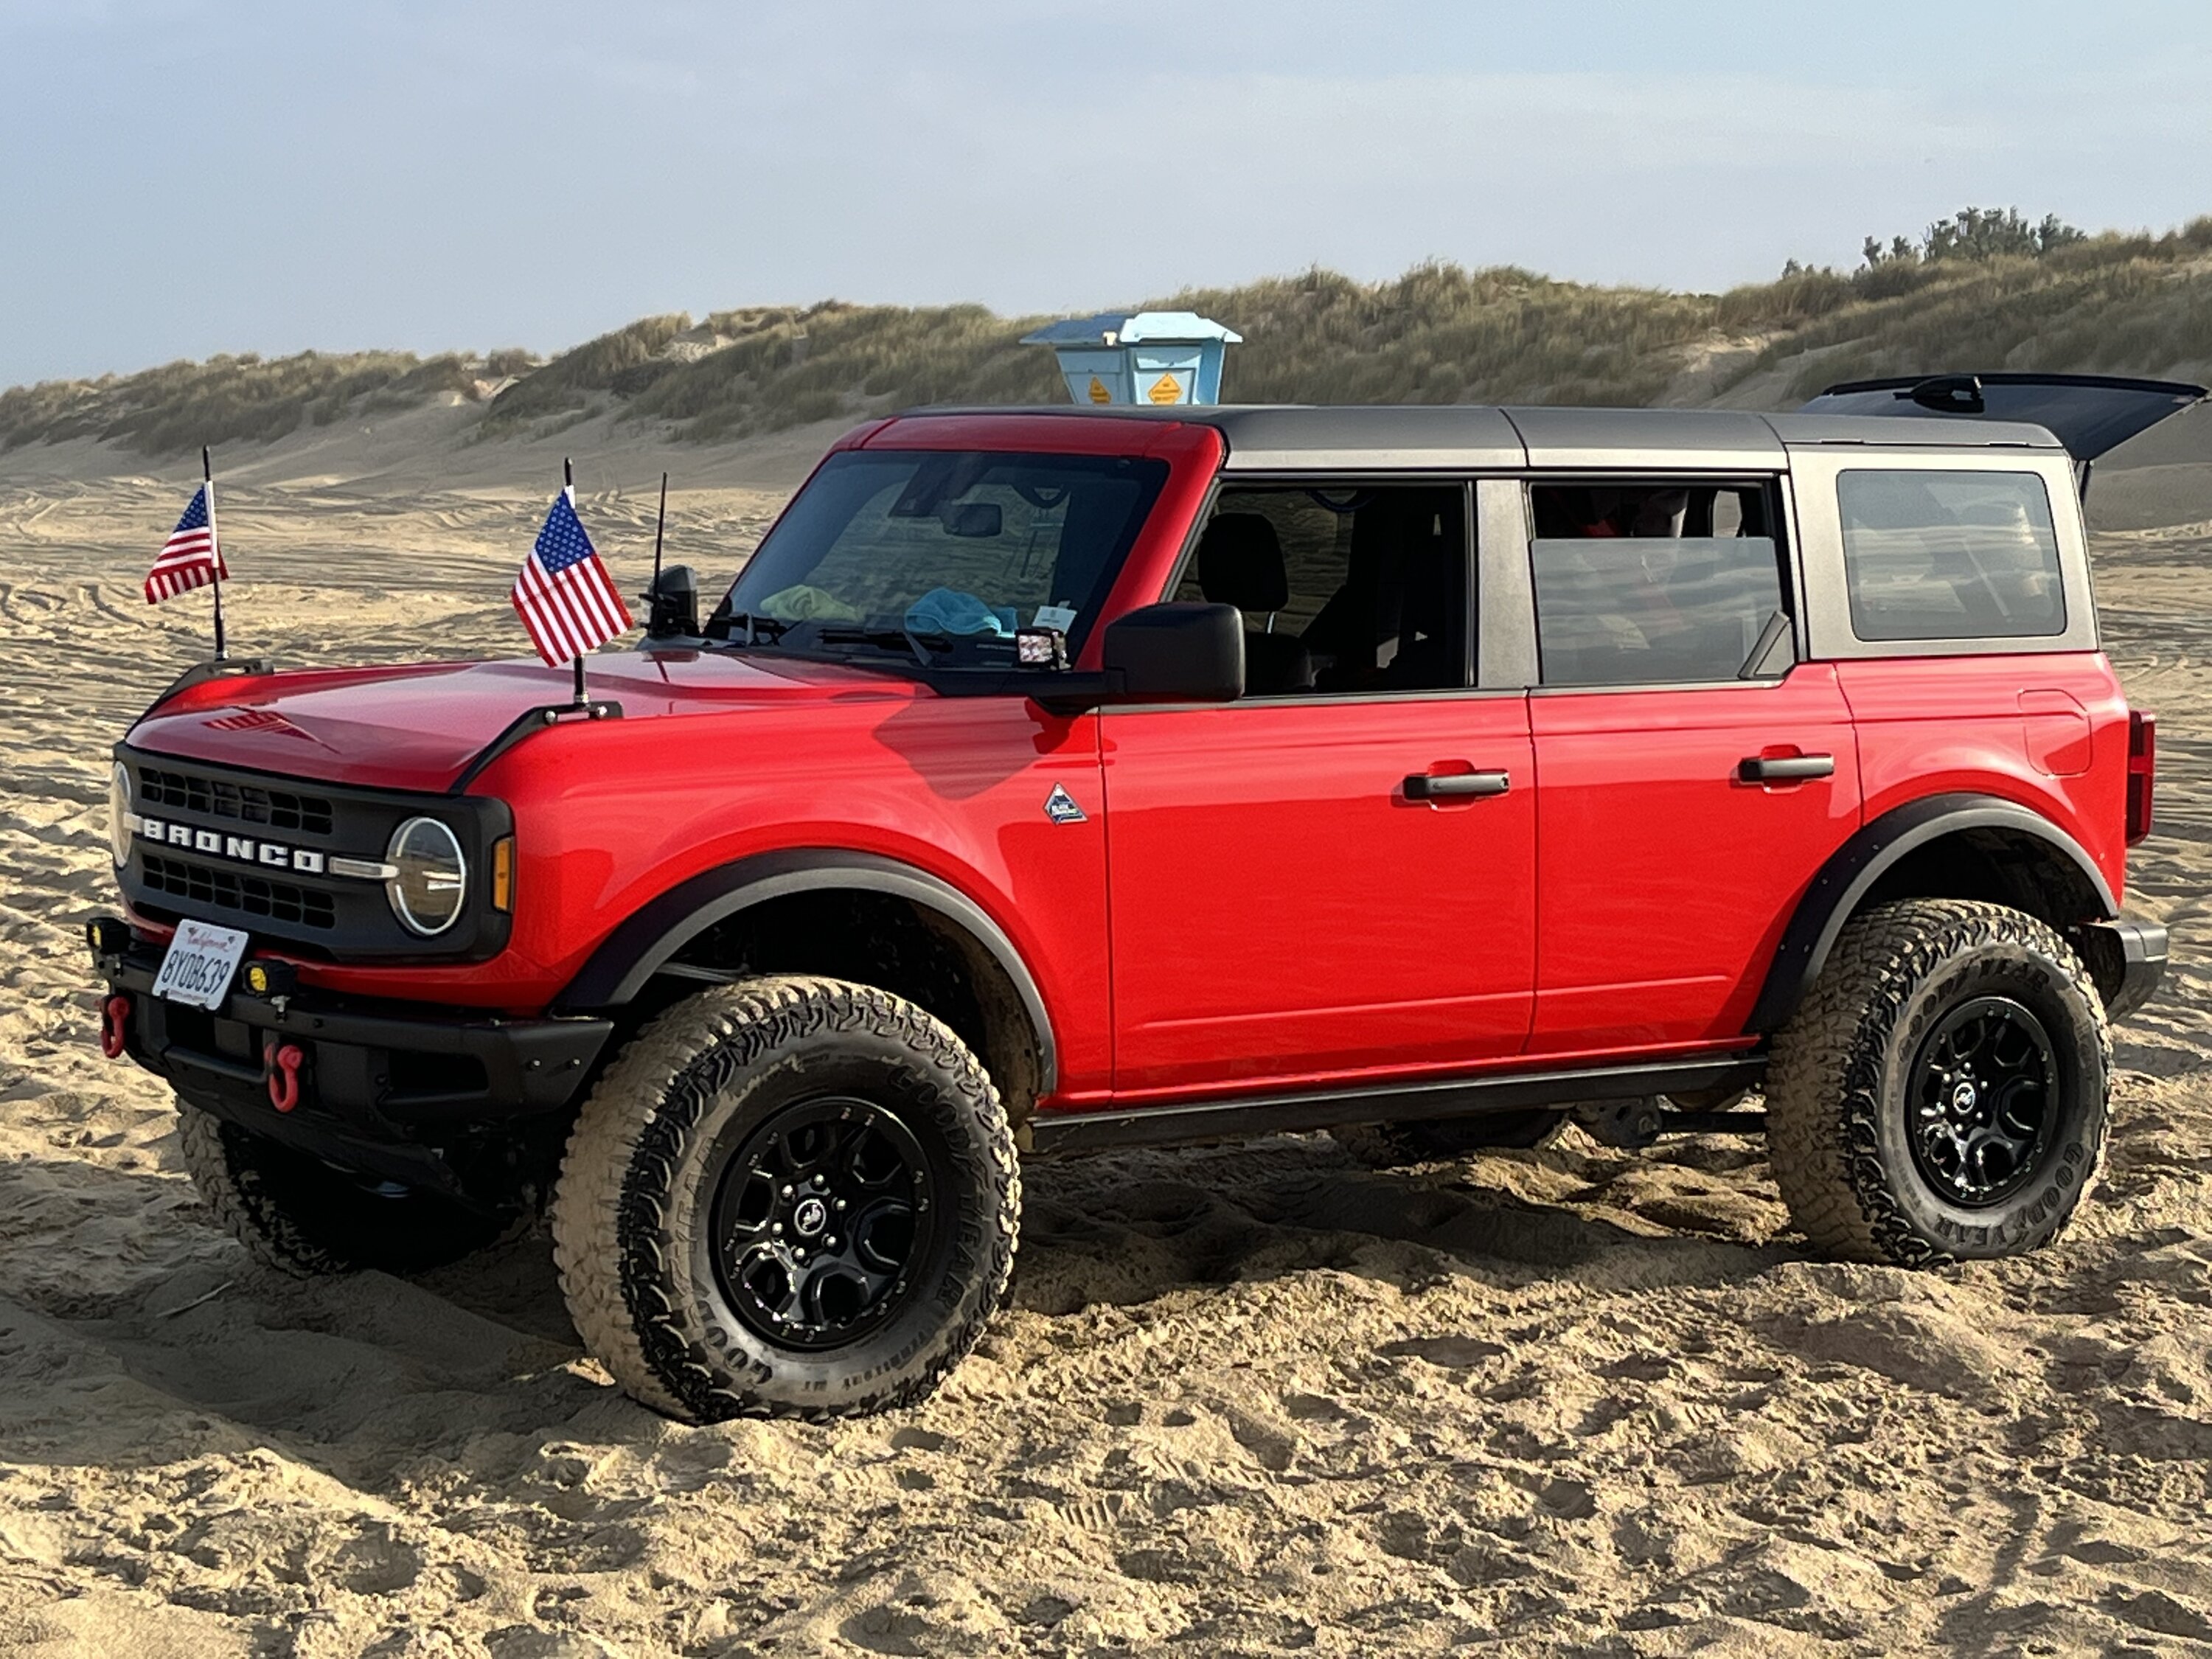 Ford Bronco Let's see your favorite Bronco picture of 2022 📸 9D77754F-70E2-44FE-9A41-17E37DD78569